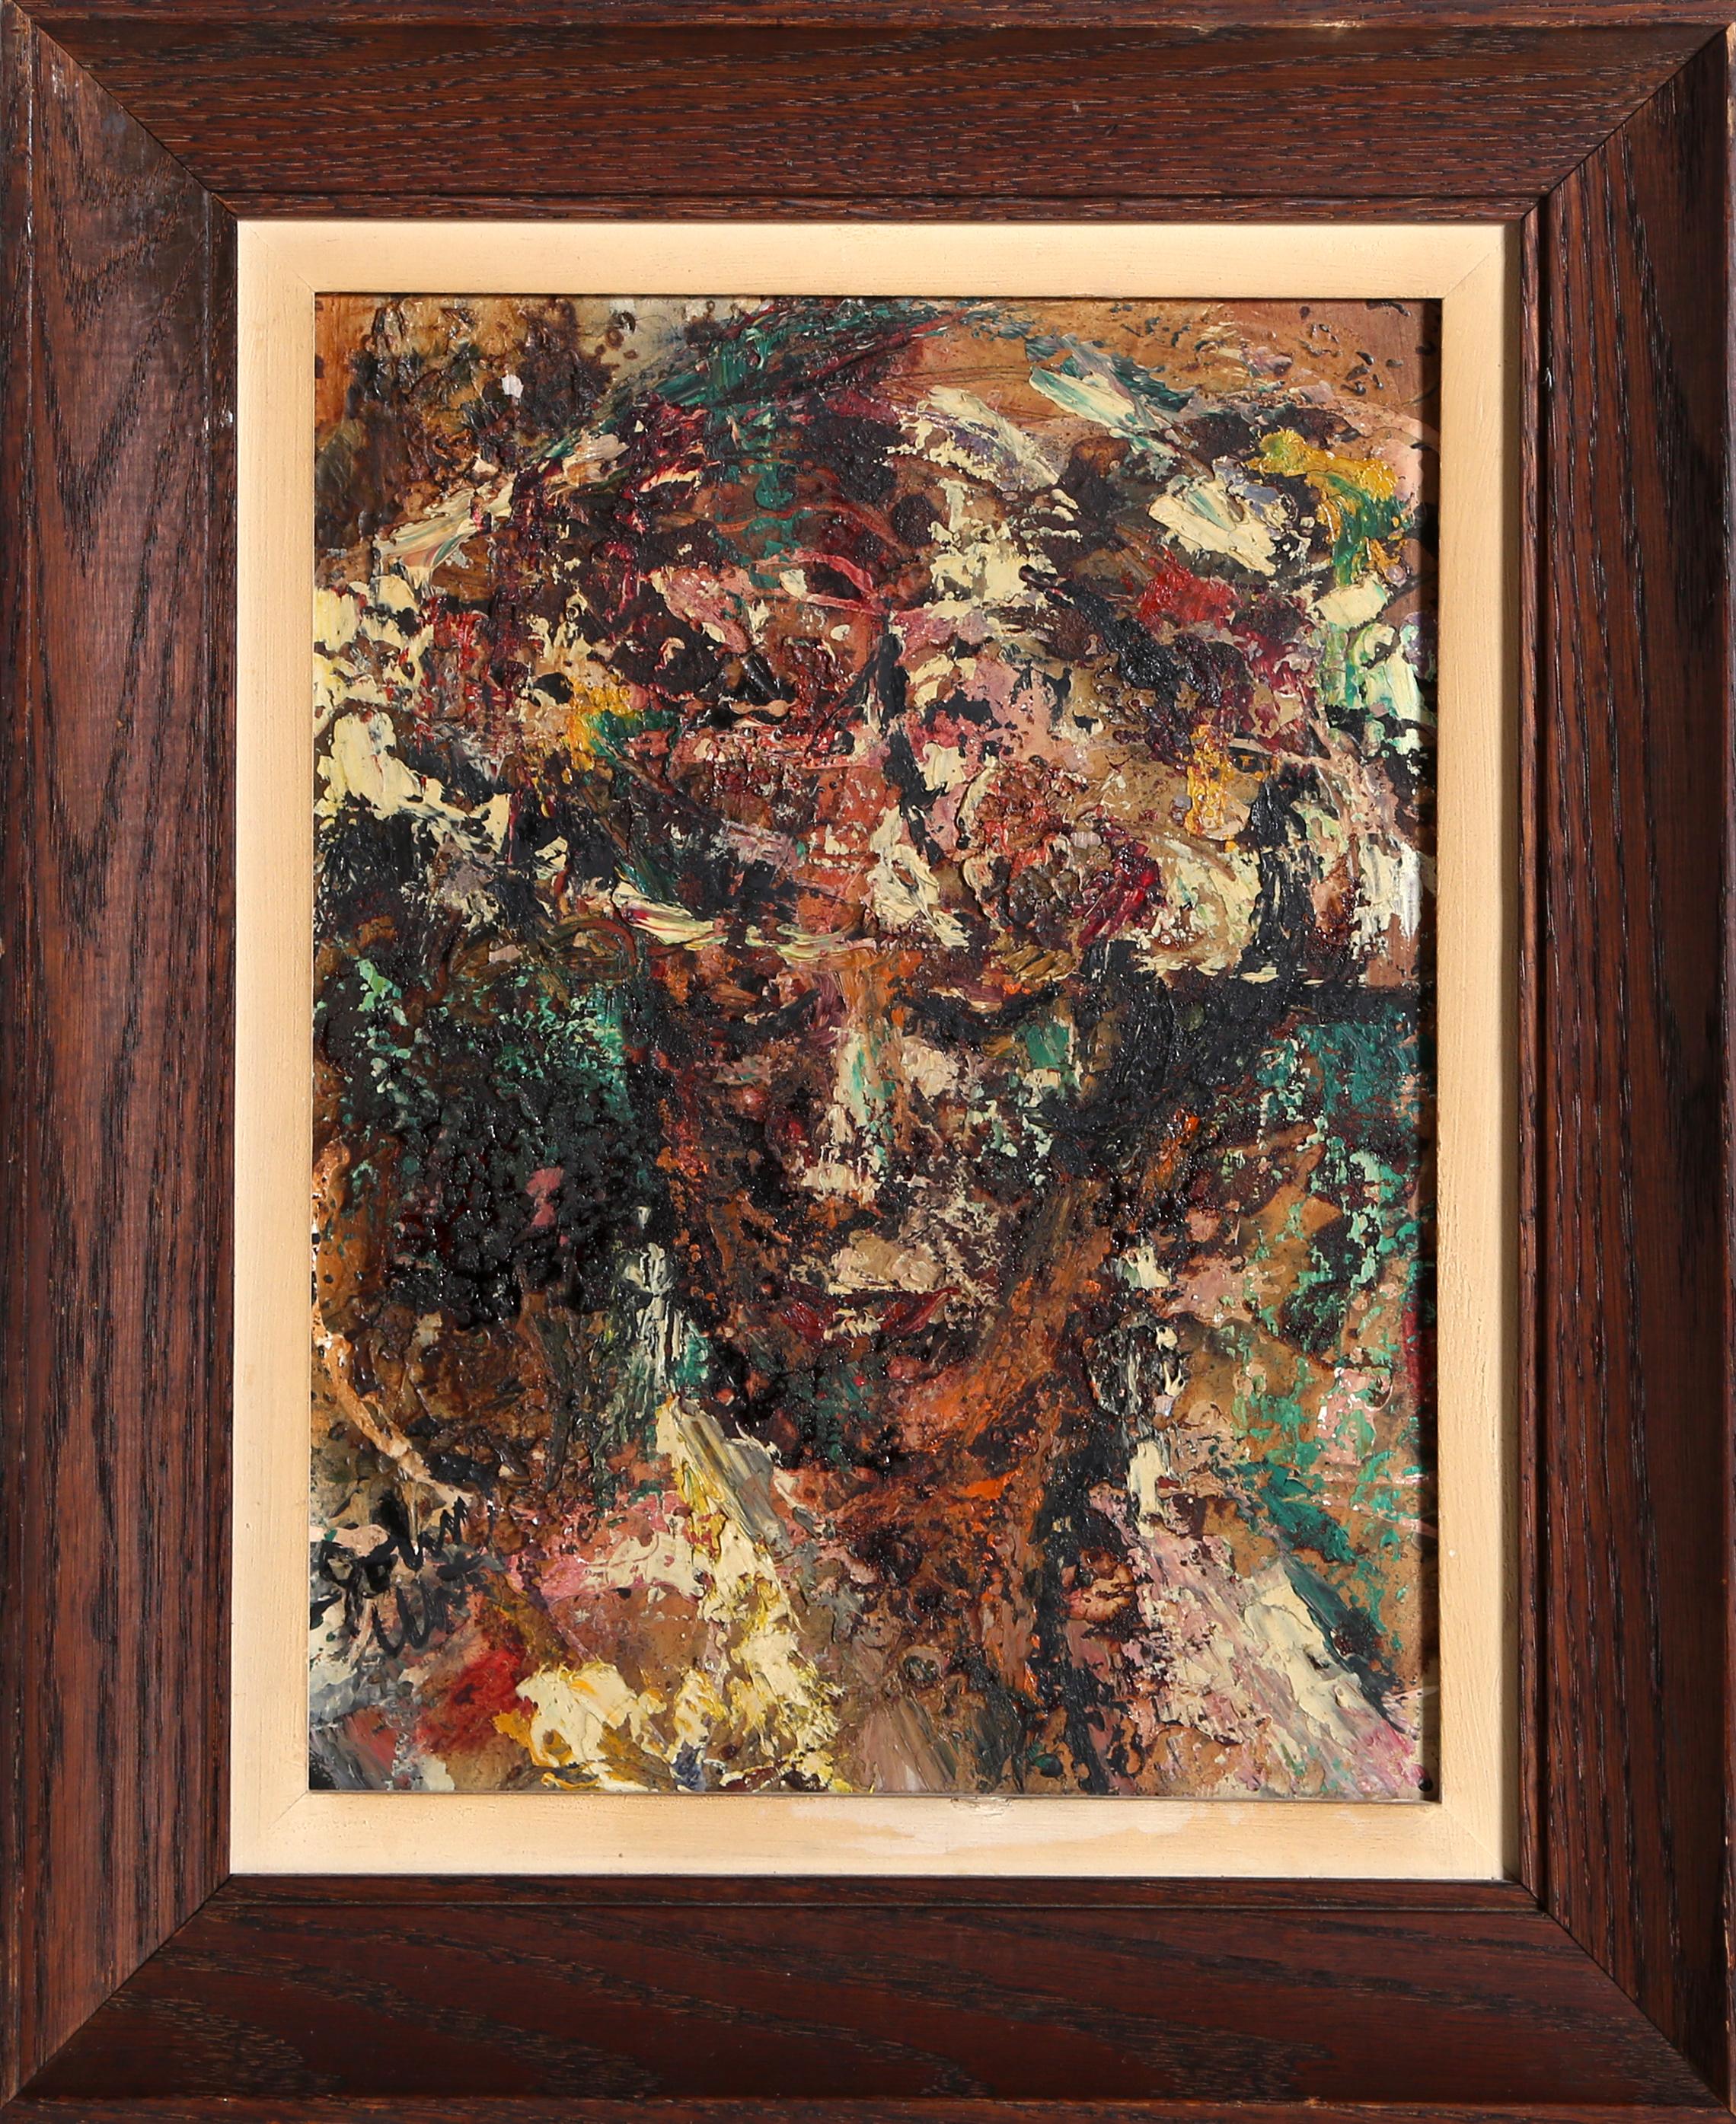 Portrait of A Woman, Abstract Oil Painting by John Uht